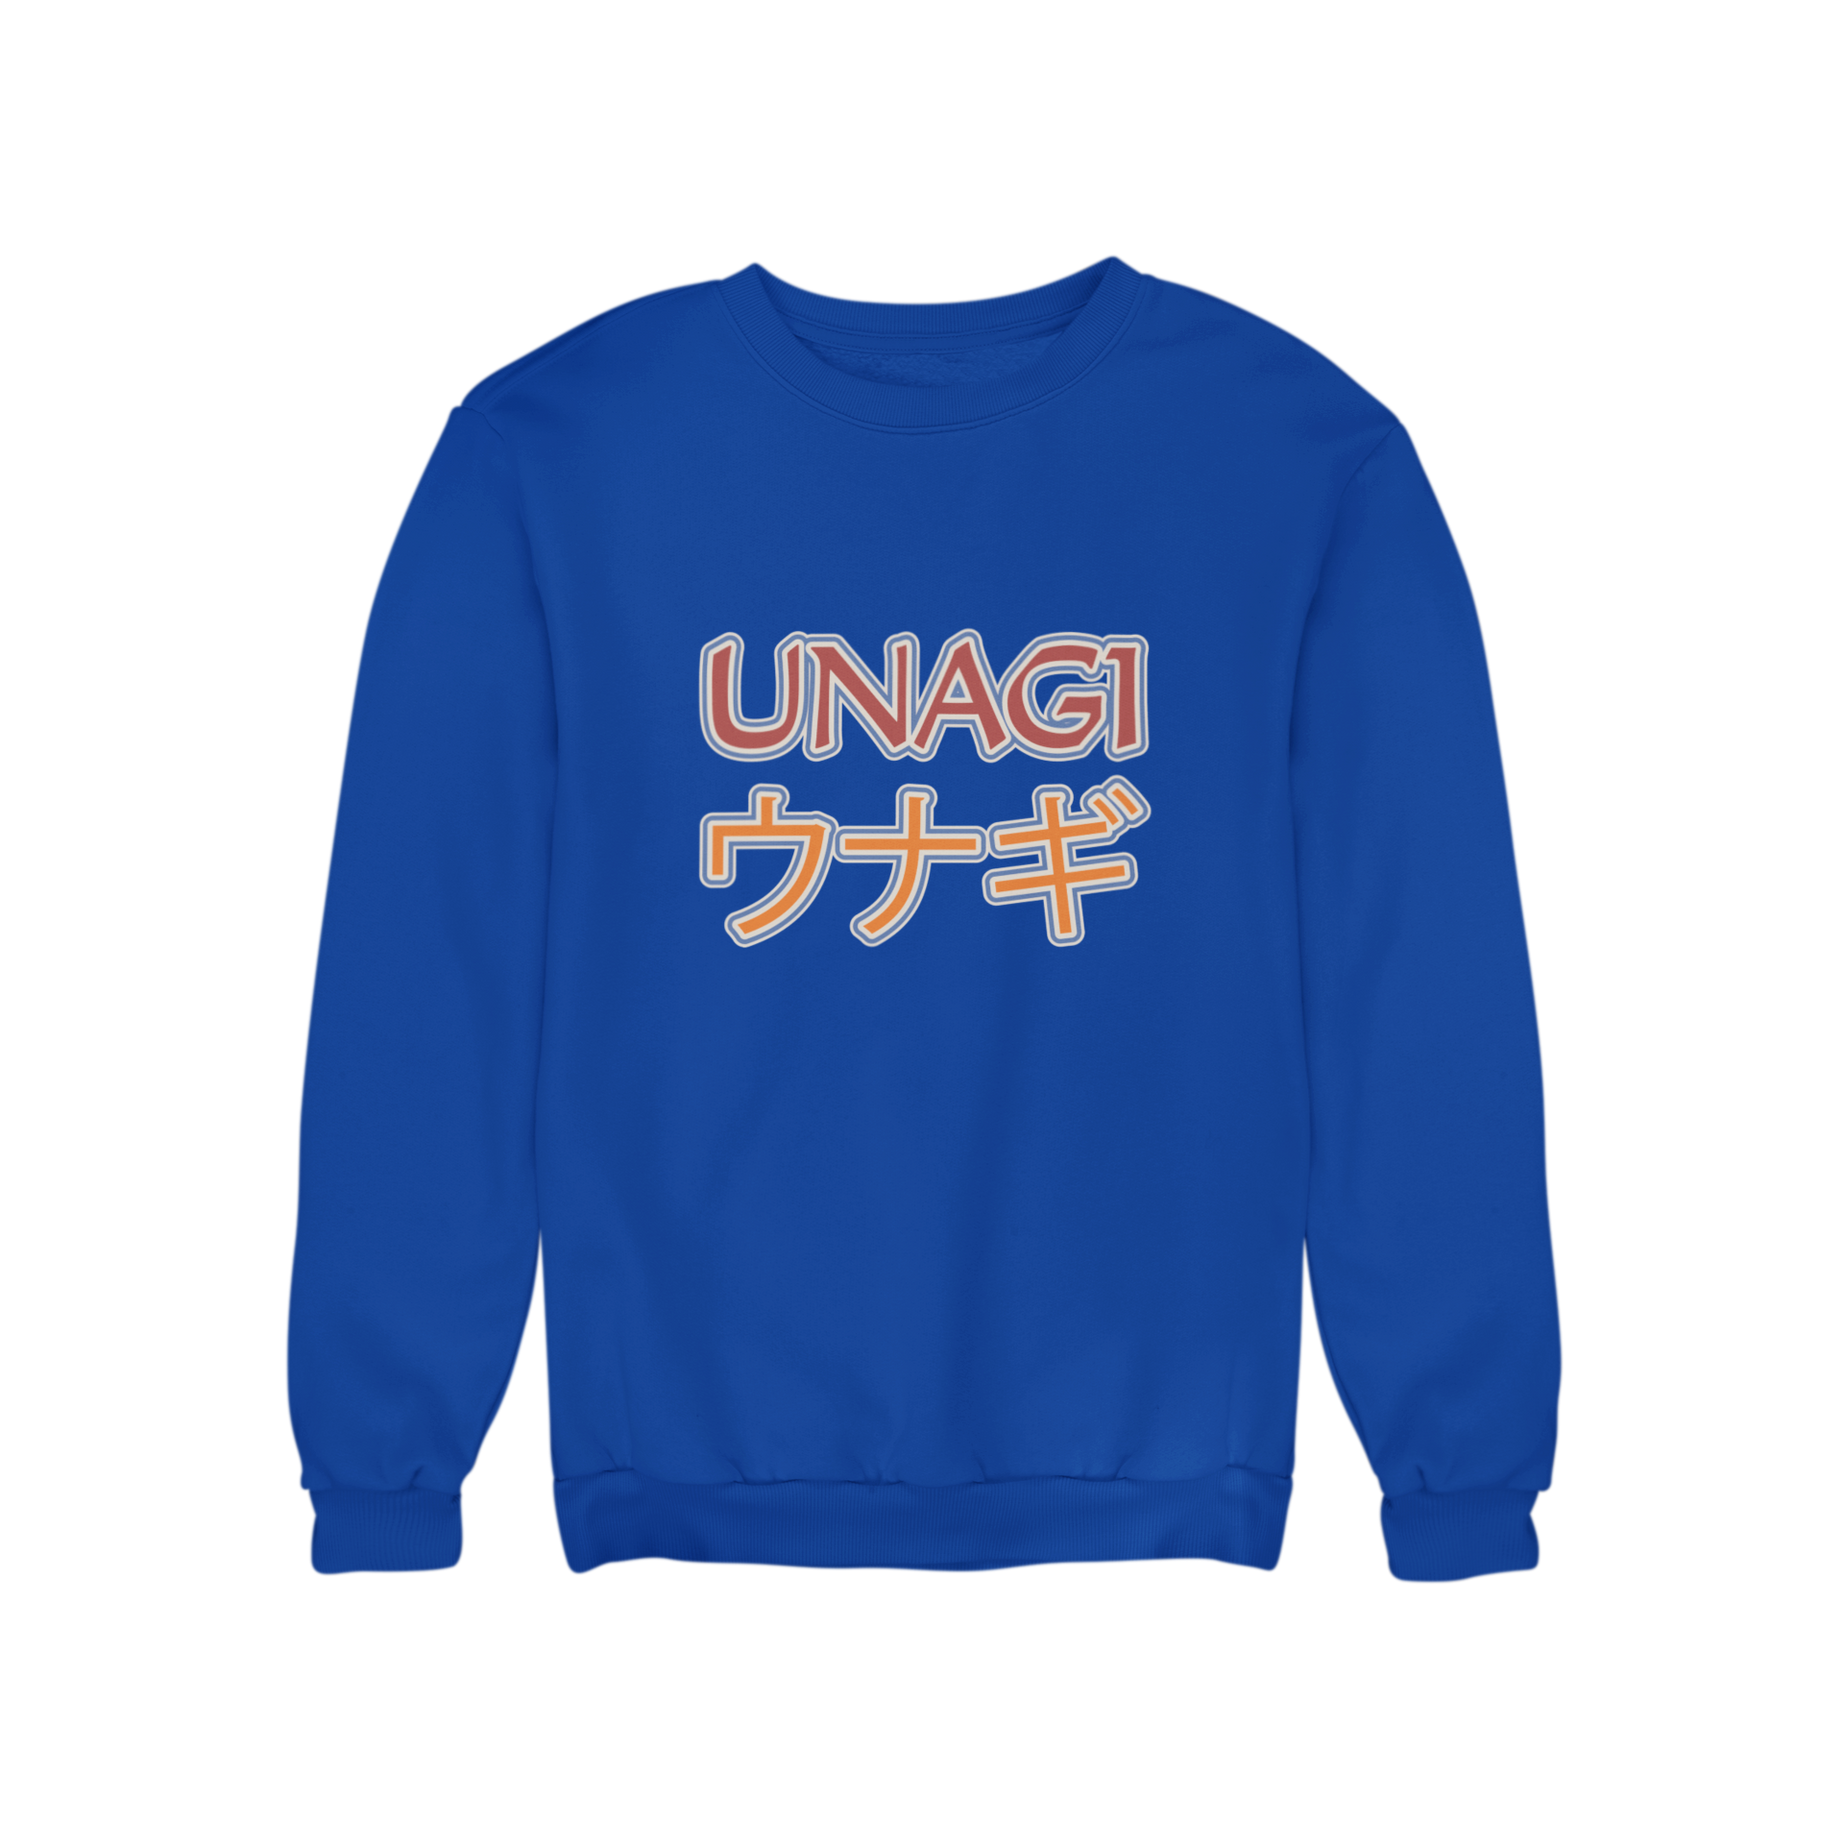 Are you a fan of Friends? If yes, then you will love Teevolution's latest sweatshirt design. The one with "Unagi" is a must-have addition to your wardrobe. Get prepared for anything life throws your way with this stylish and comfortable Friends sweatshirt.